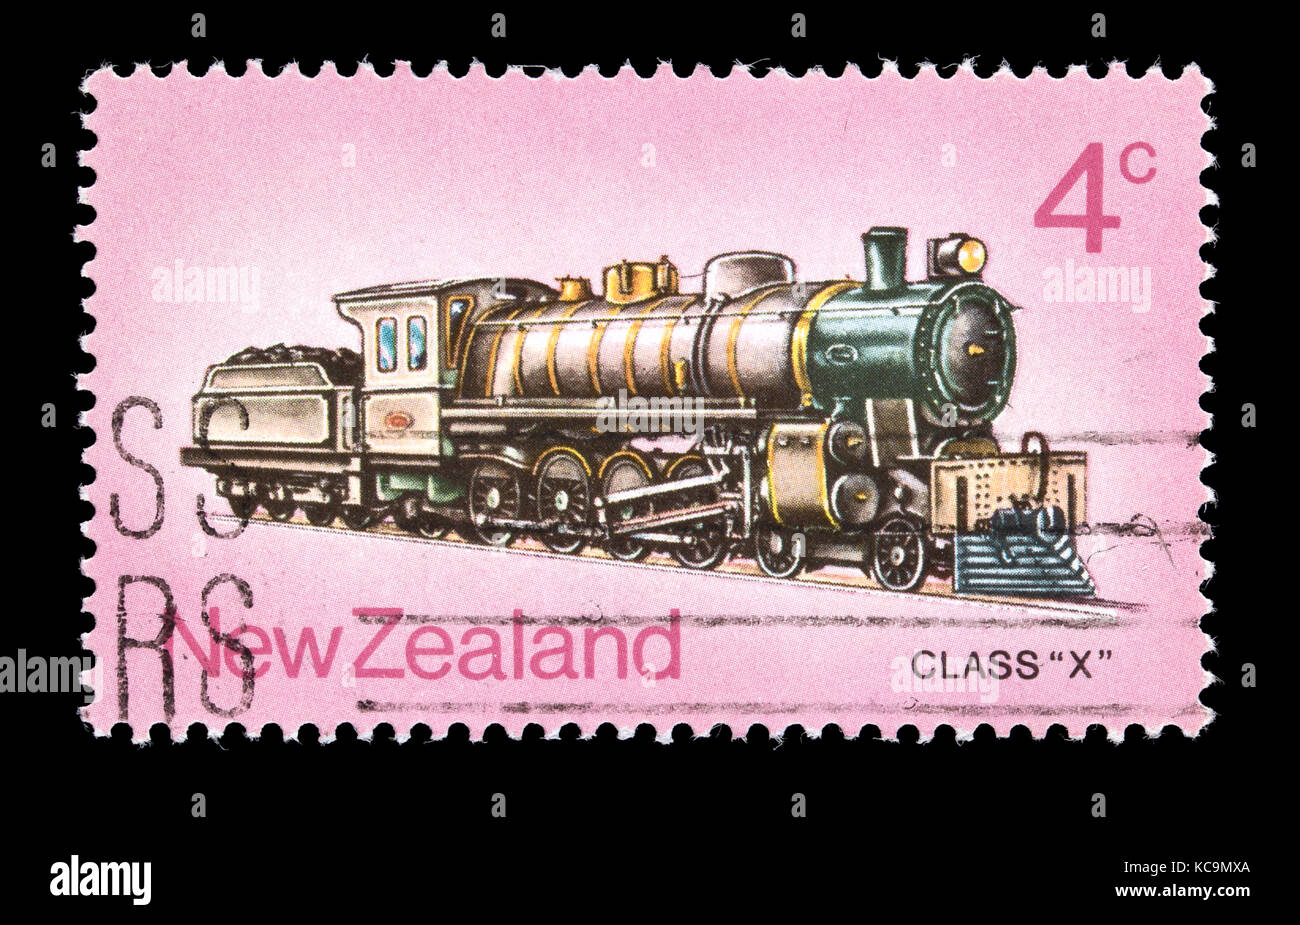 Postage stamp from New Zealand depicting a Class X steam locomotive Stock Photo